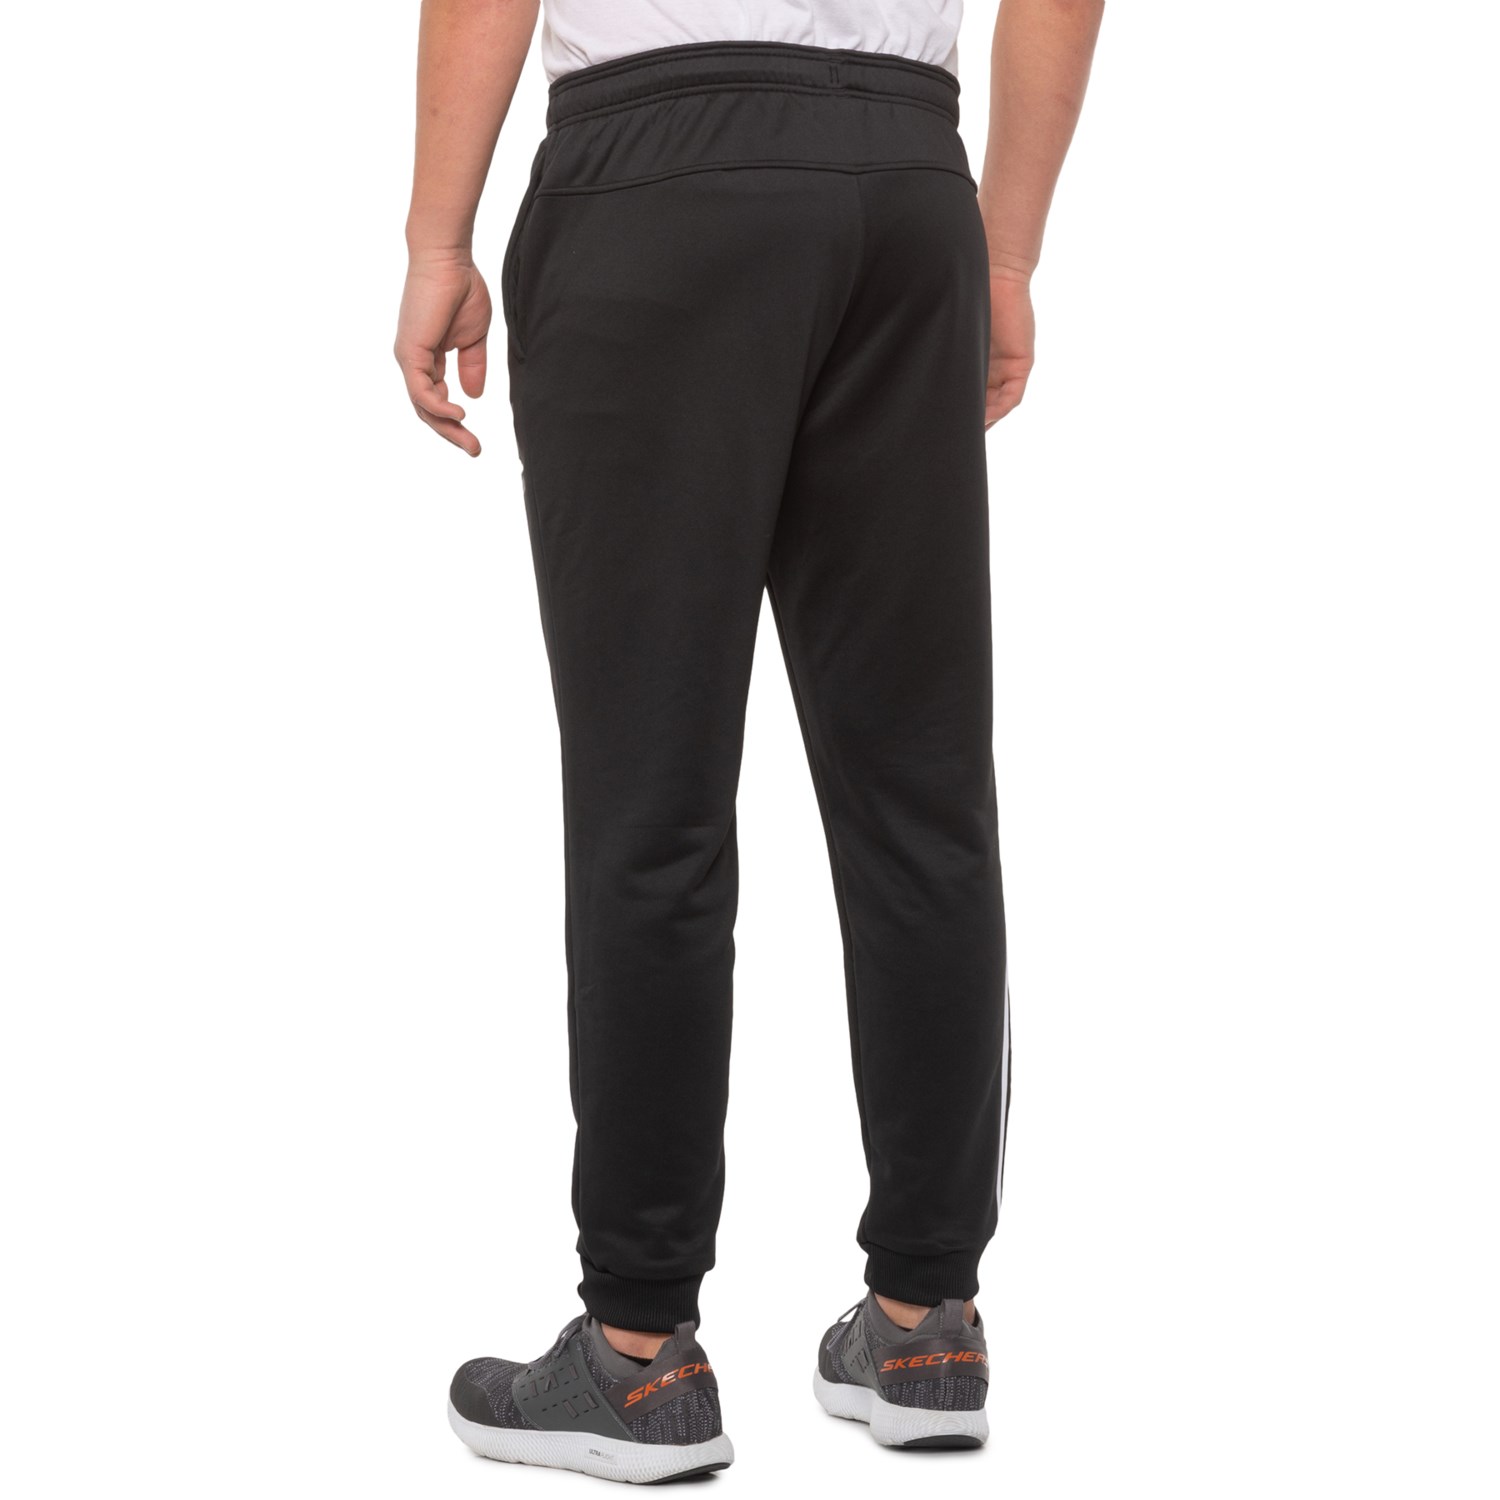 adidas Axis Tech Pants (For Men) - Save 21%